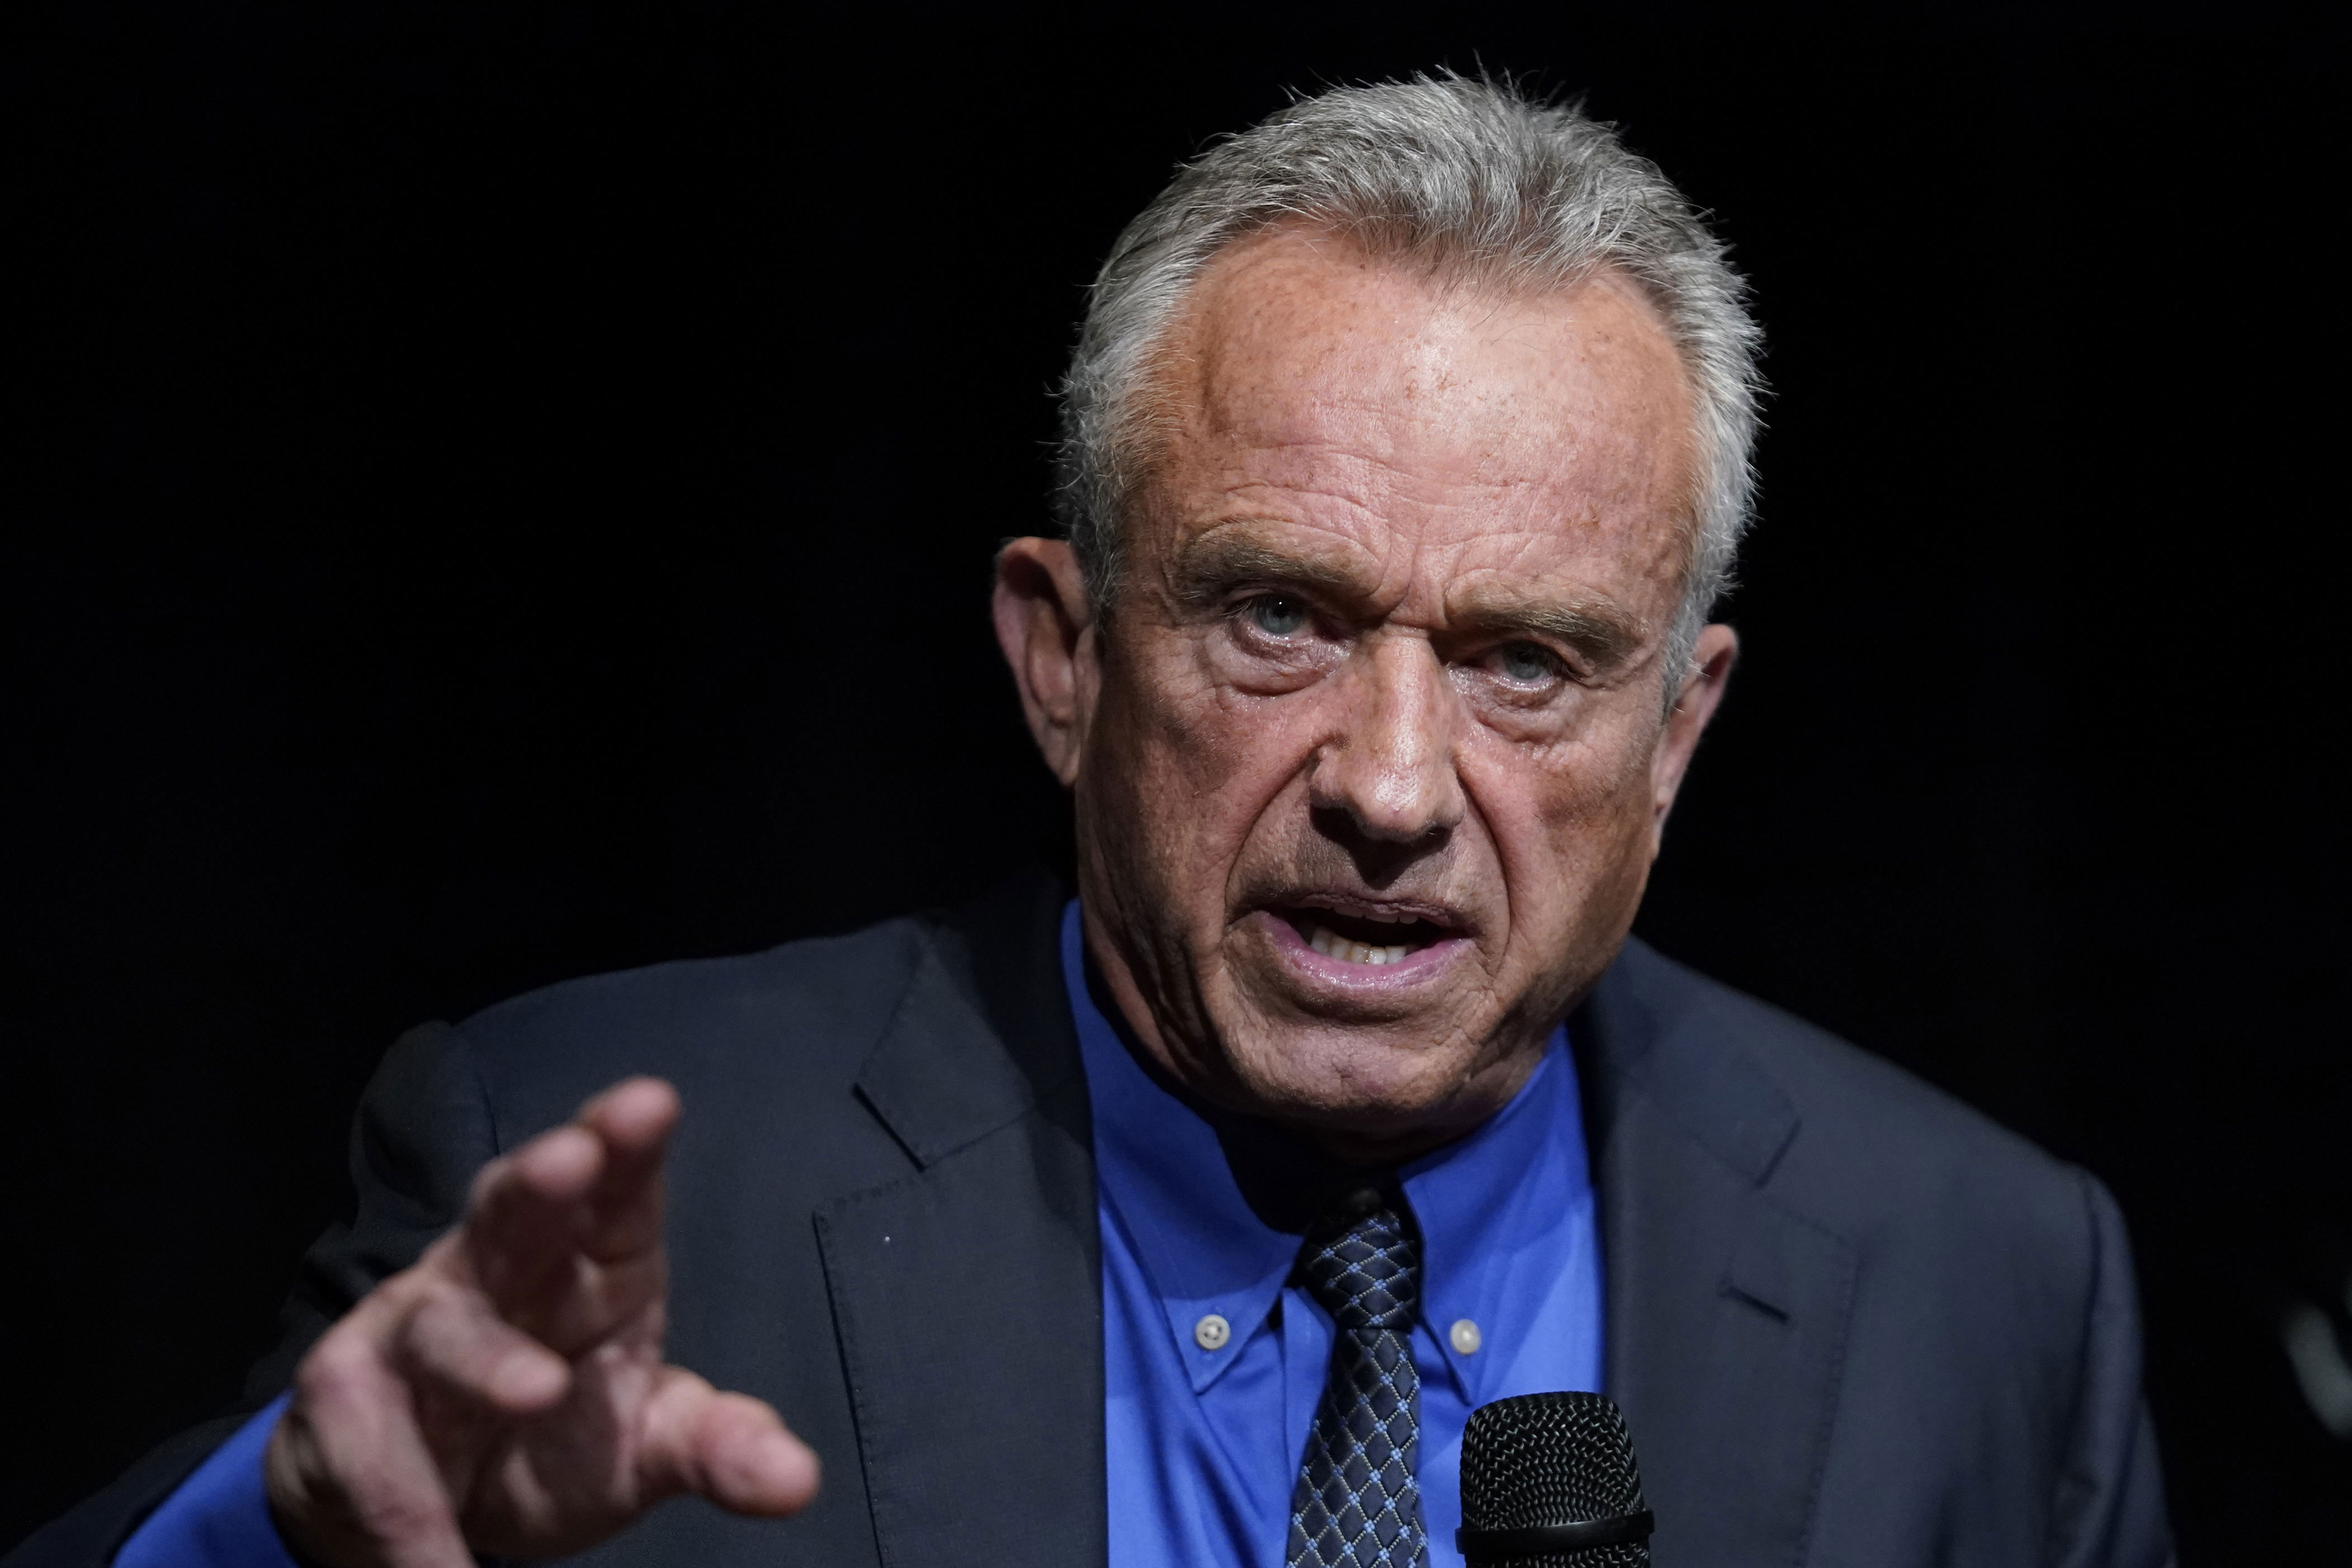 RFK Jr. surprise guest at event attended by top New Jersey GOP ...